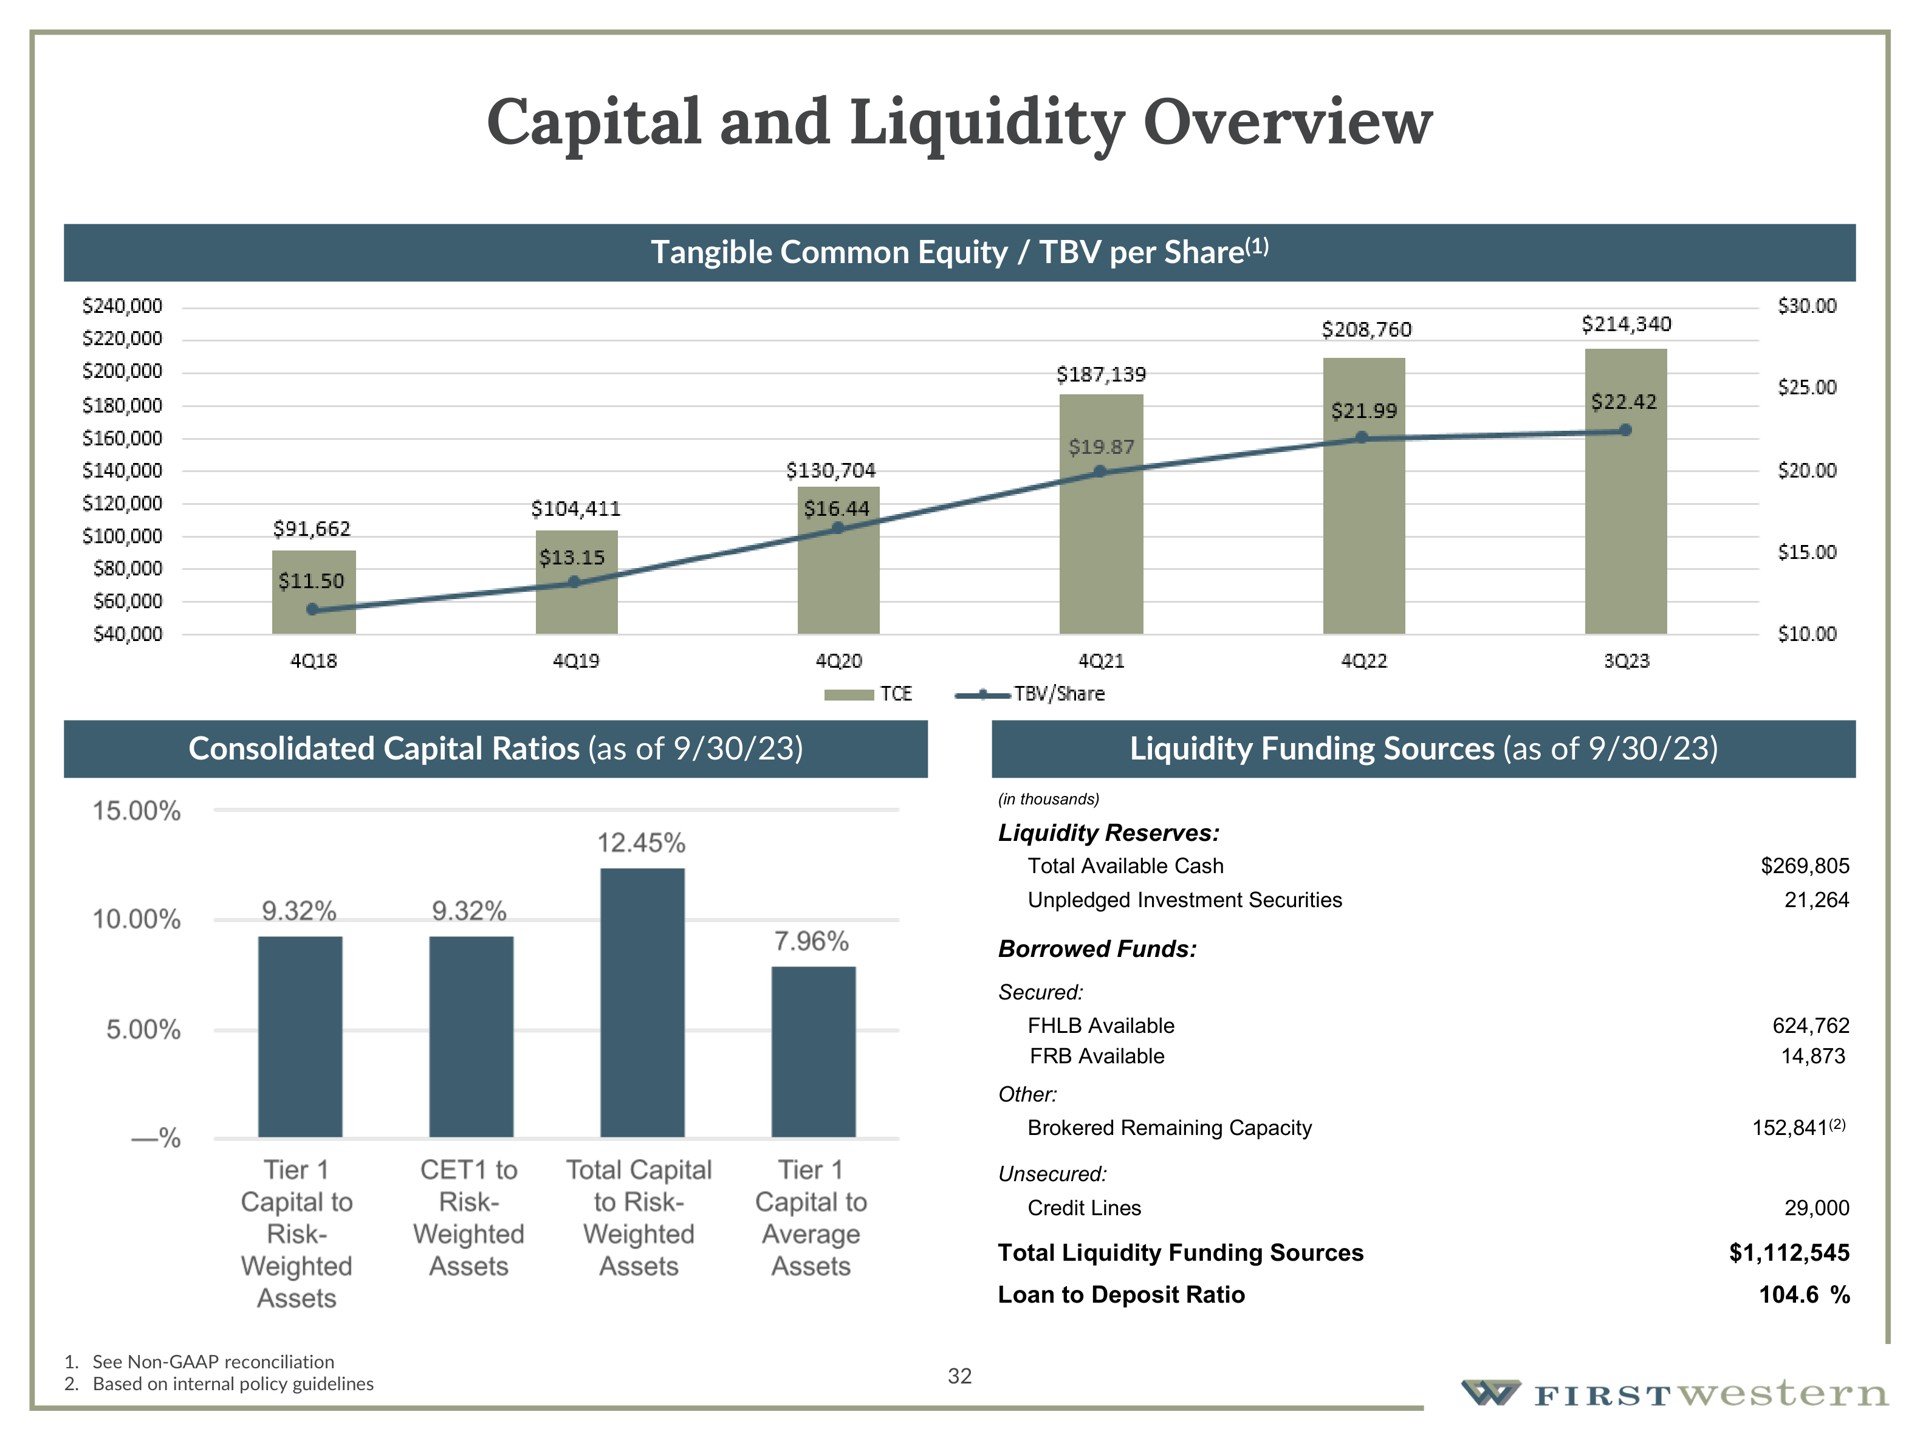 capital and liquidity overview | First Western Financial